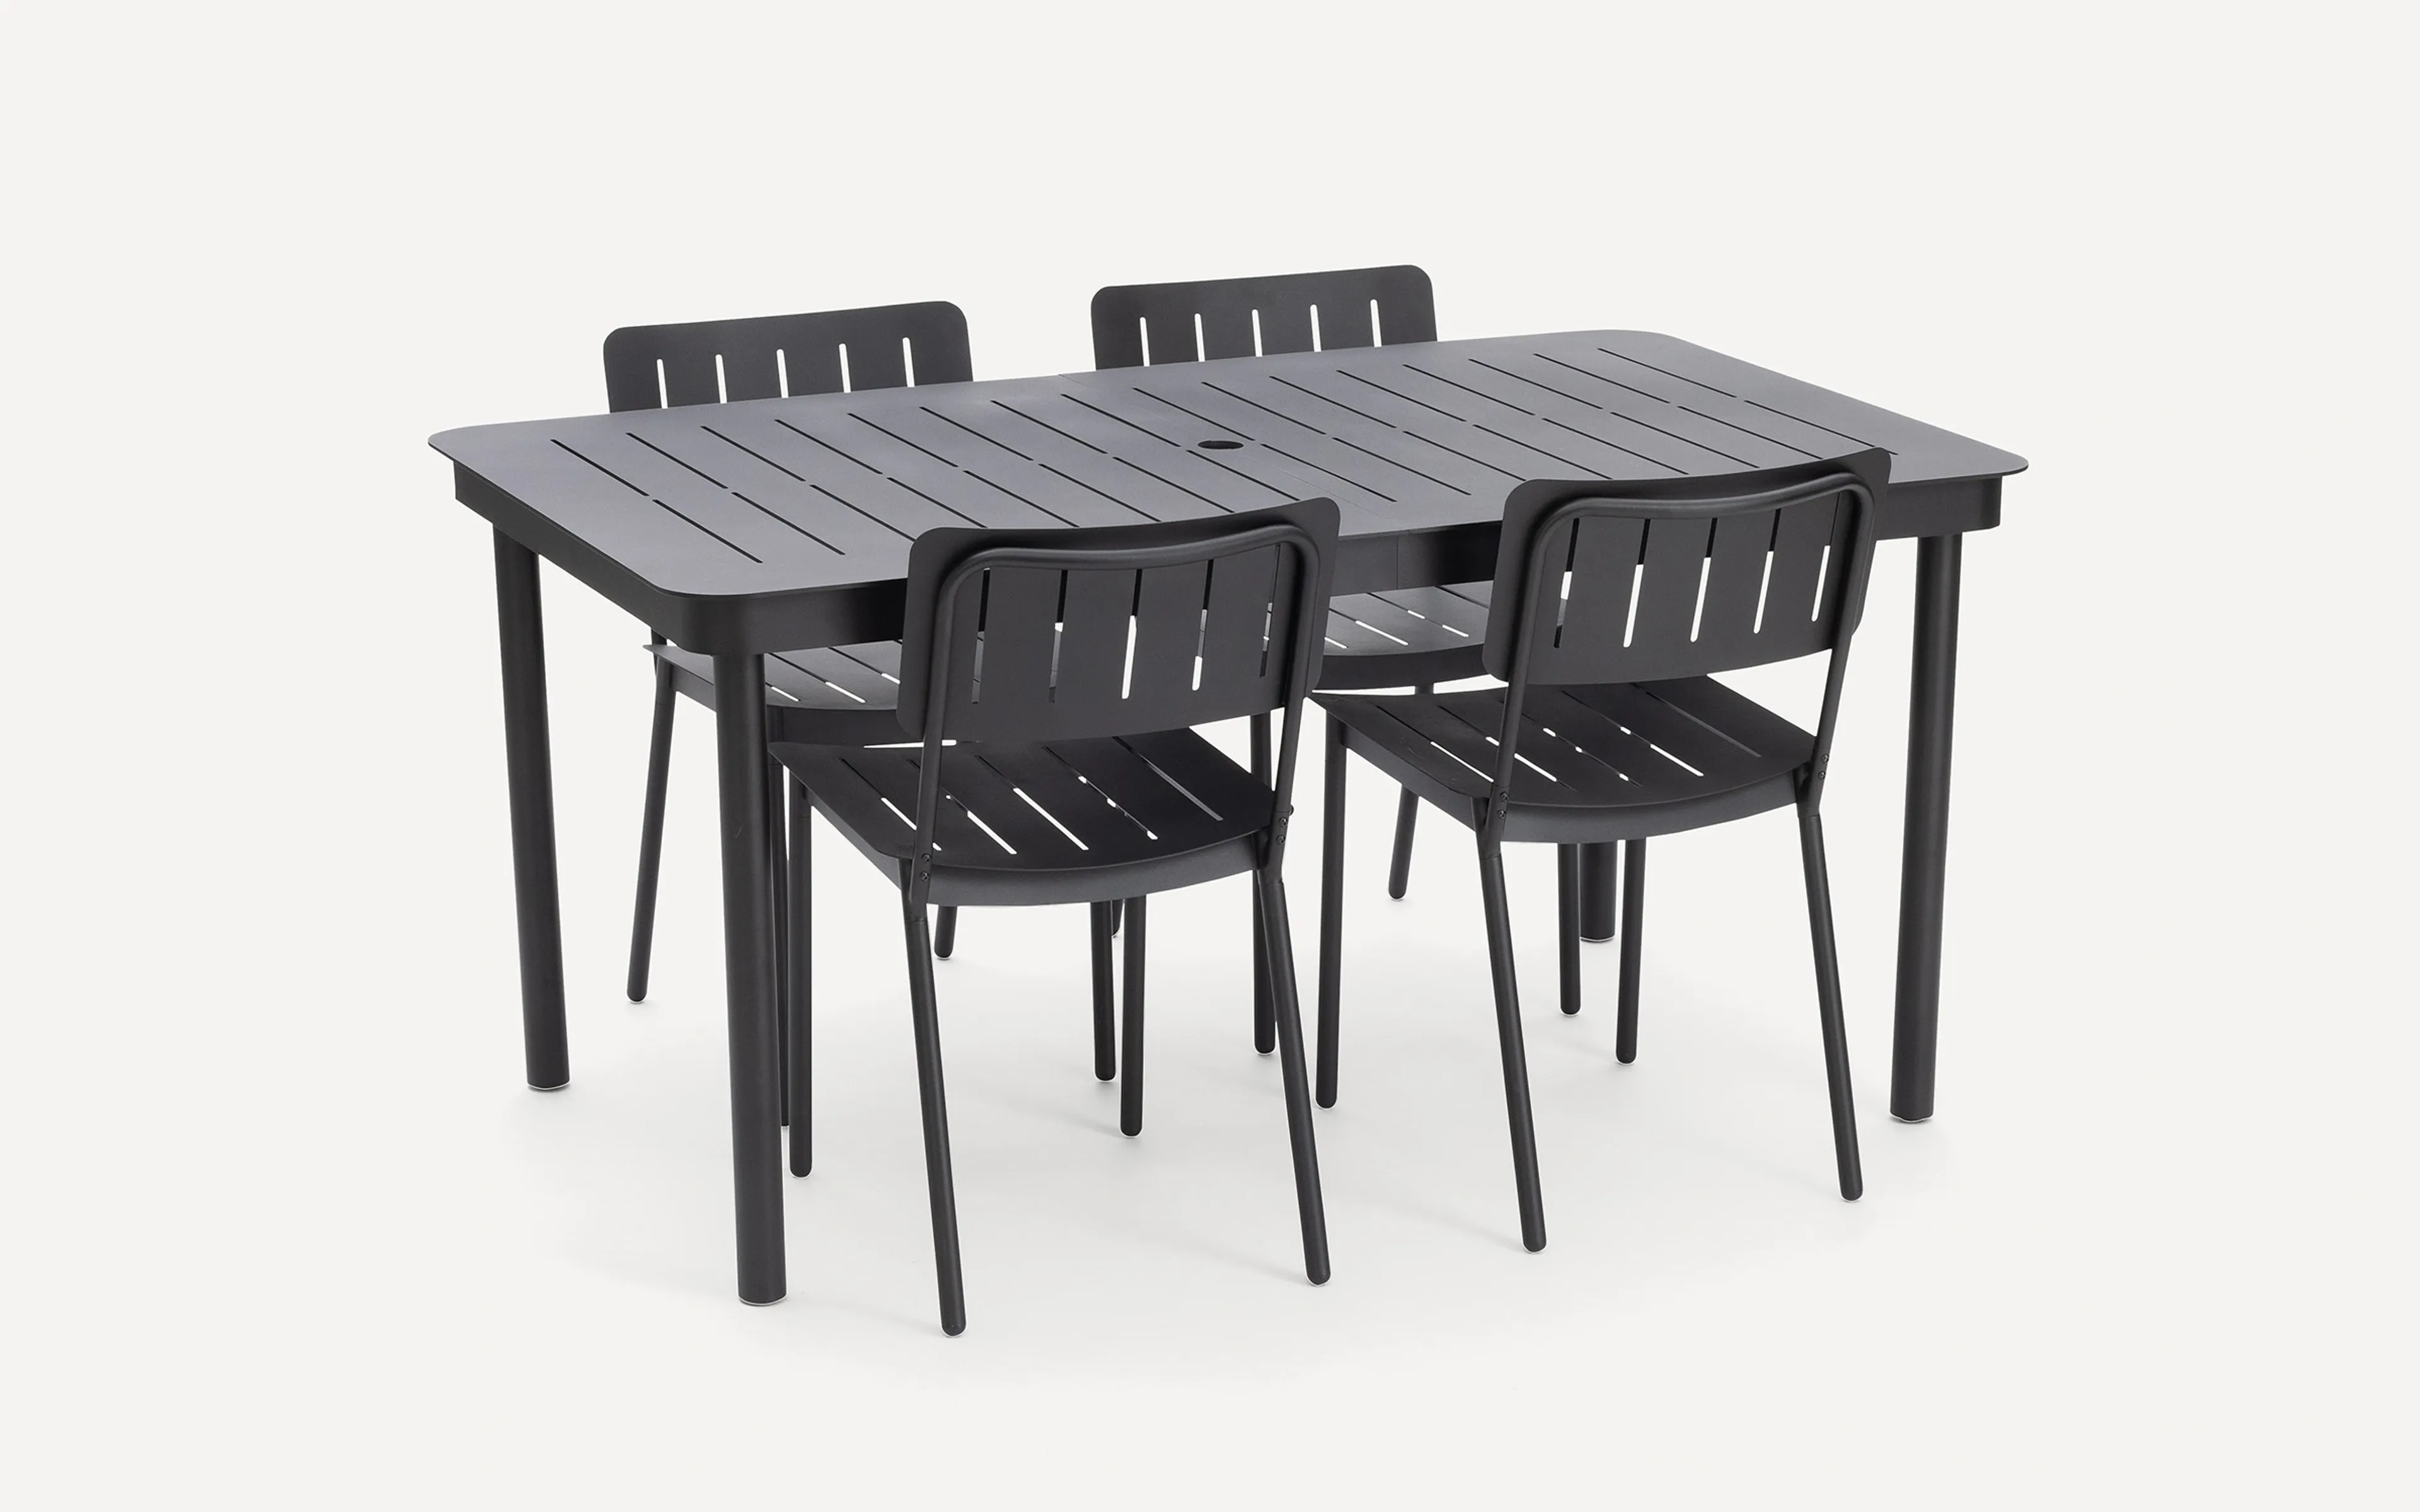 Relay Outdoor Dining Set, Table & 4 Chairs